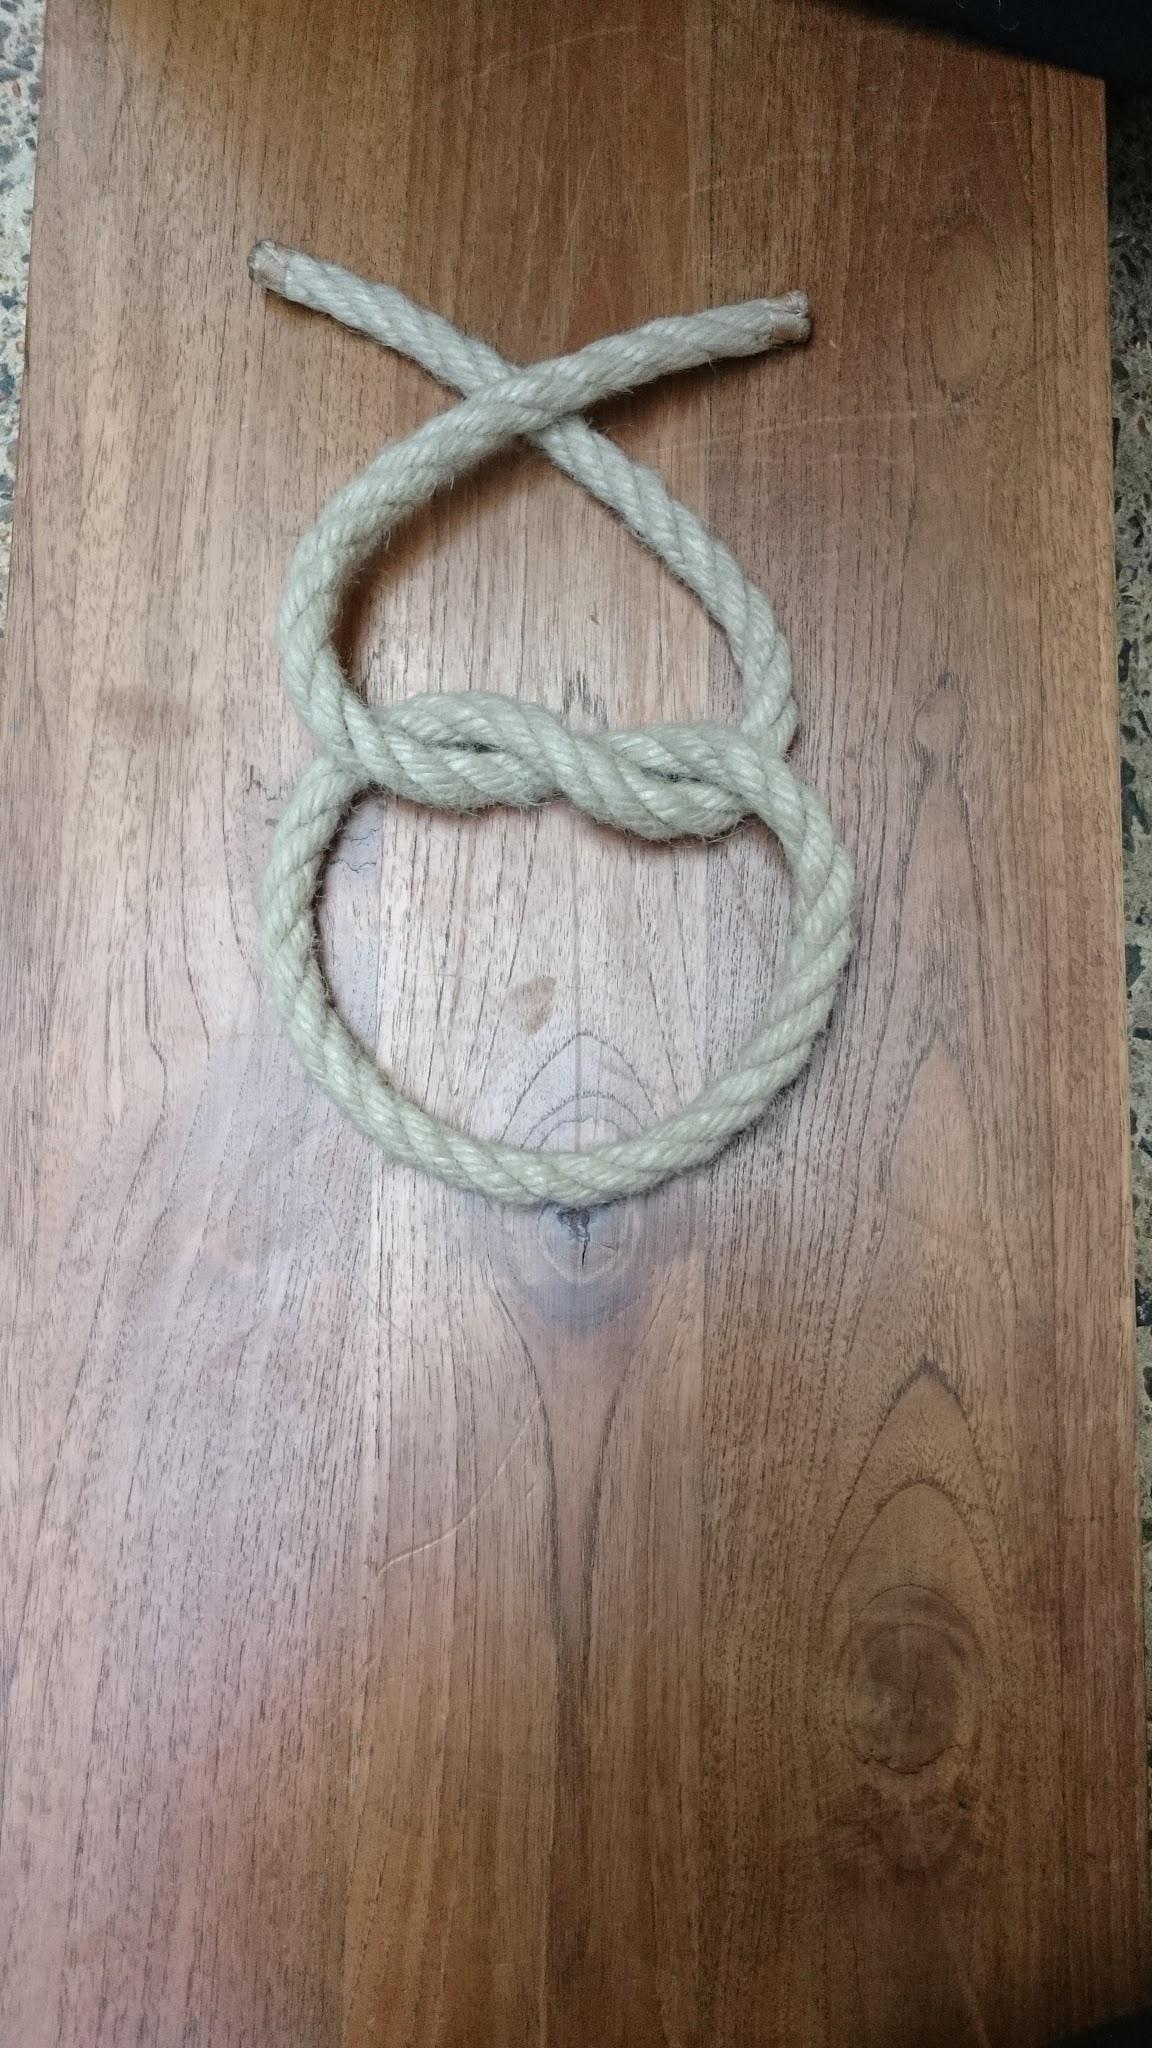 The Reef Knot - Step 4